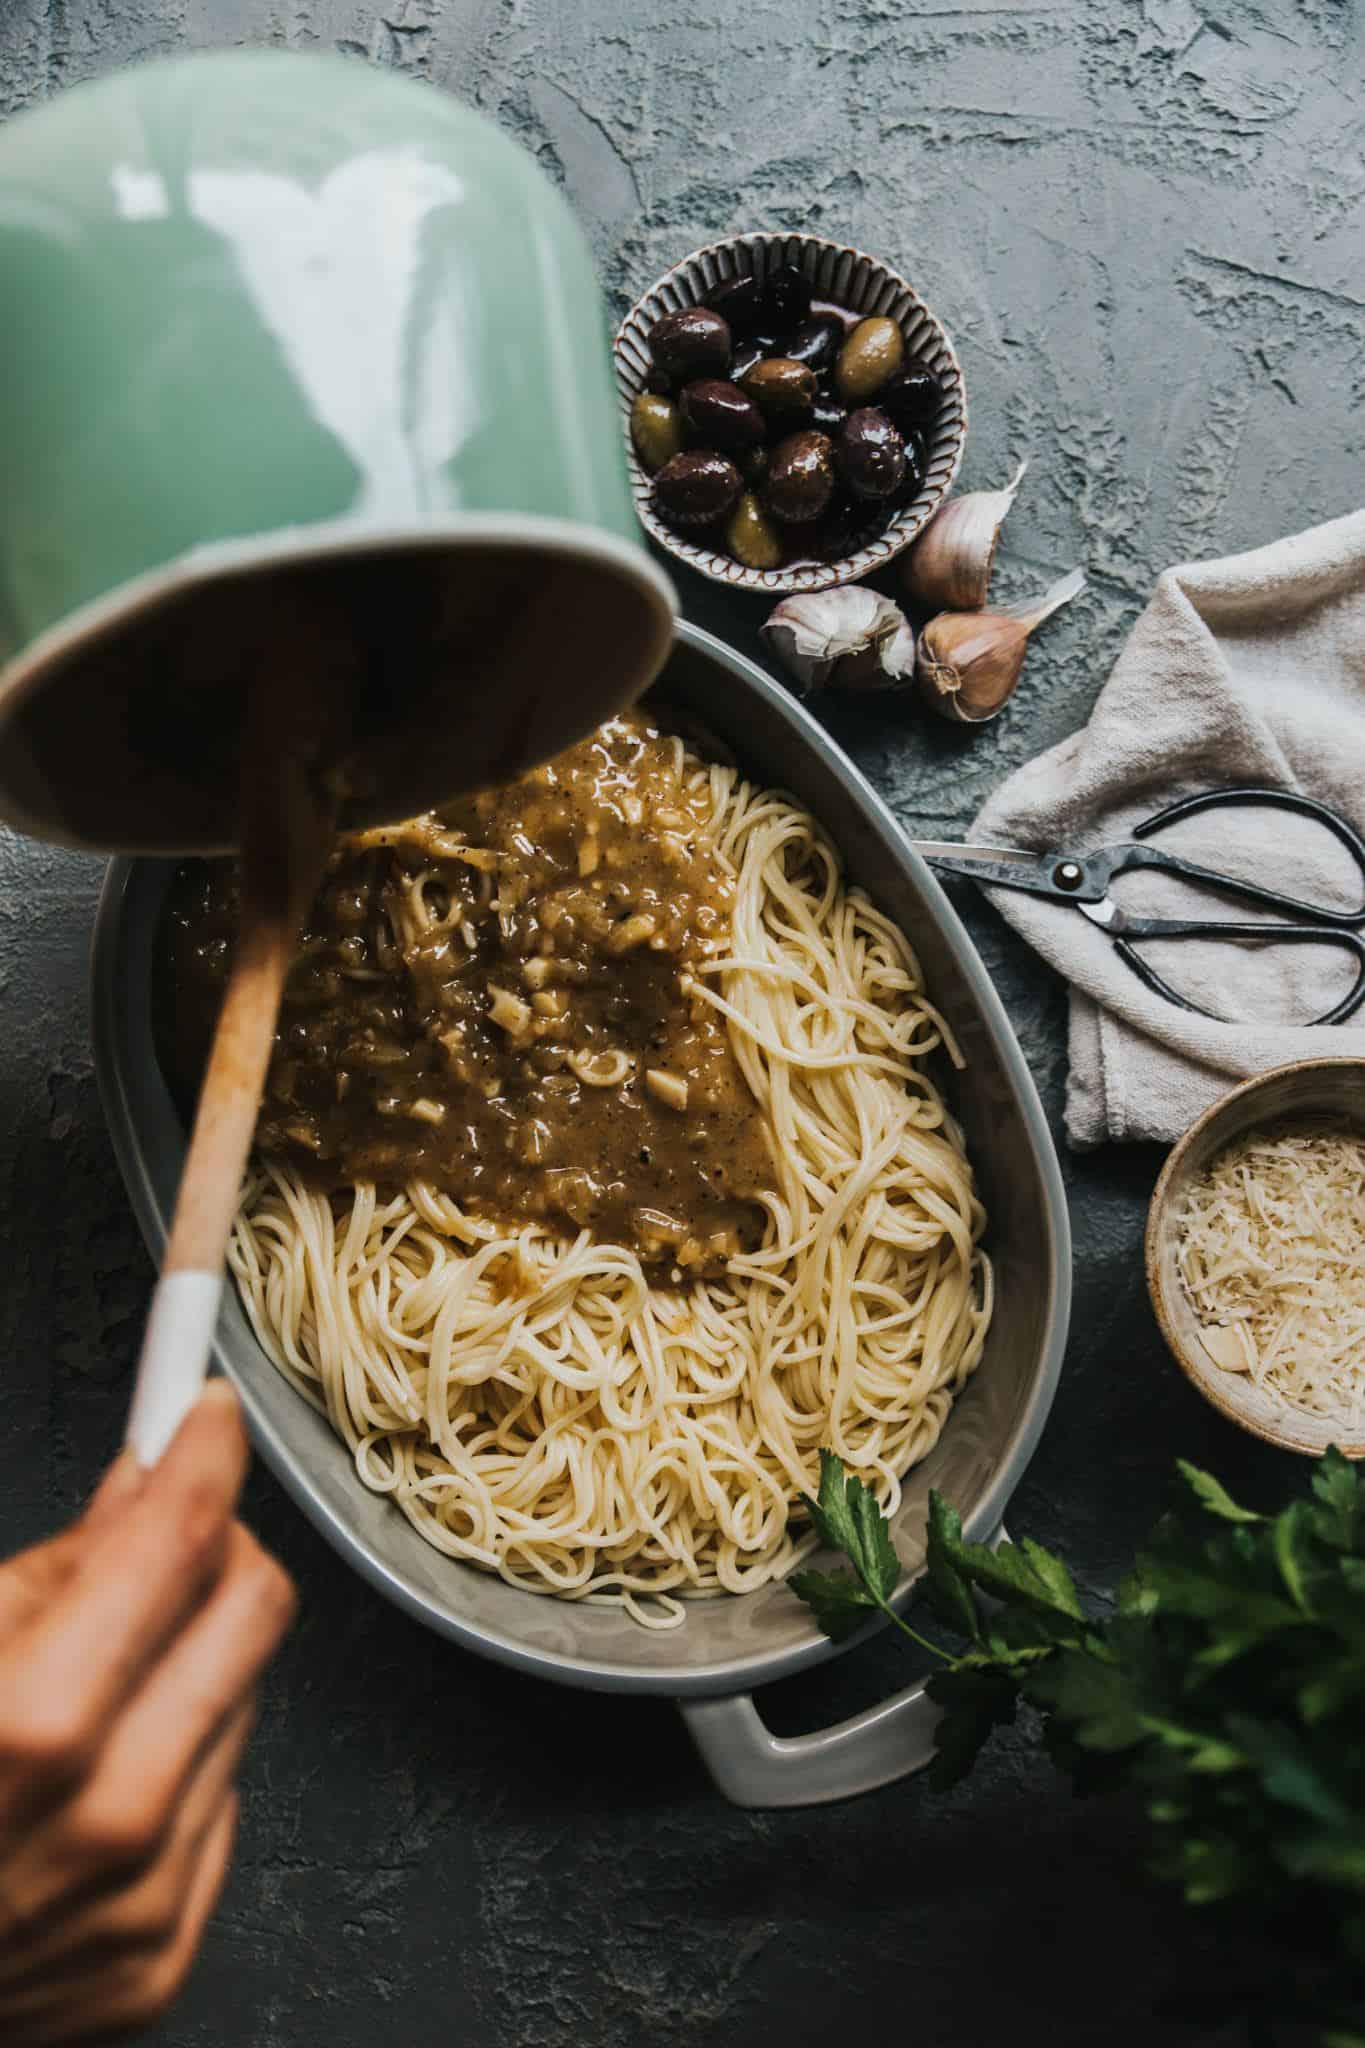 The creamy vegan truffle garlic sauce being poured onto the cooked spaghetti.